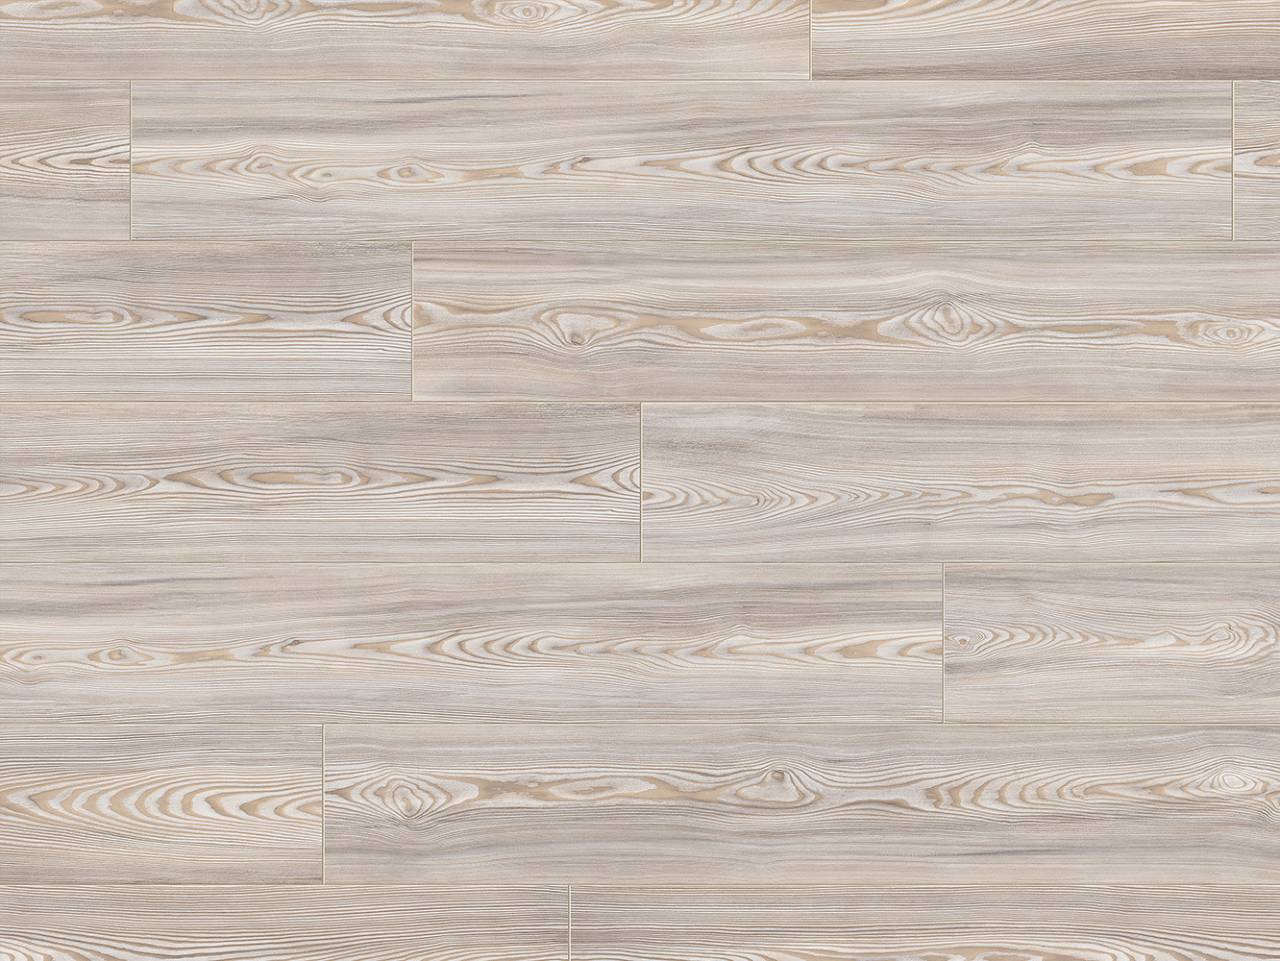 Close-up of 'K473 Pearl Scandi Larch' flooring showcasing detailed larch-like grain patterns and pearl-toned hues.